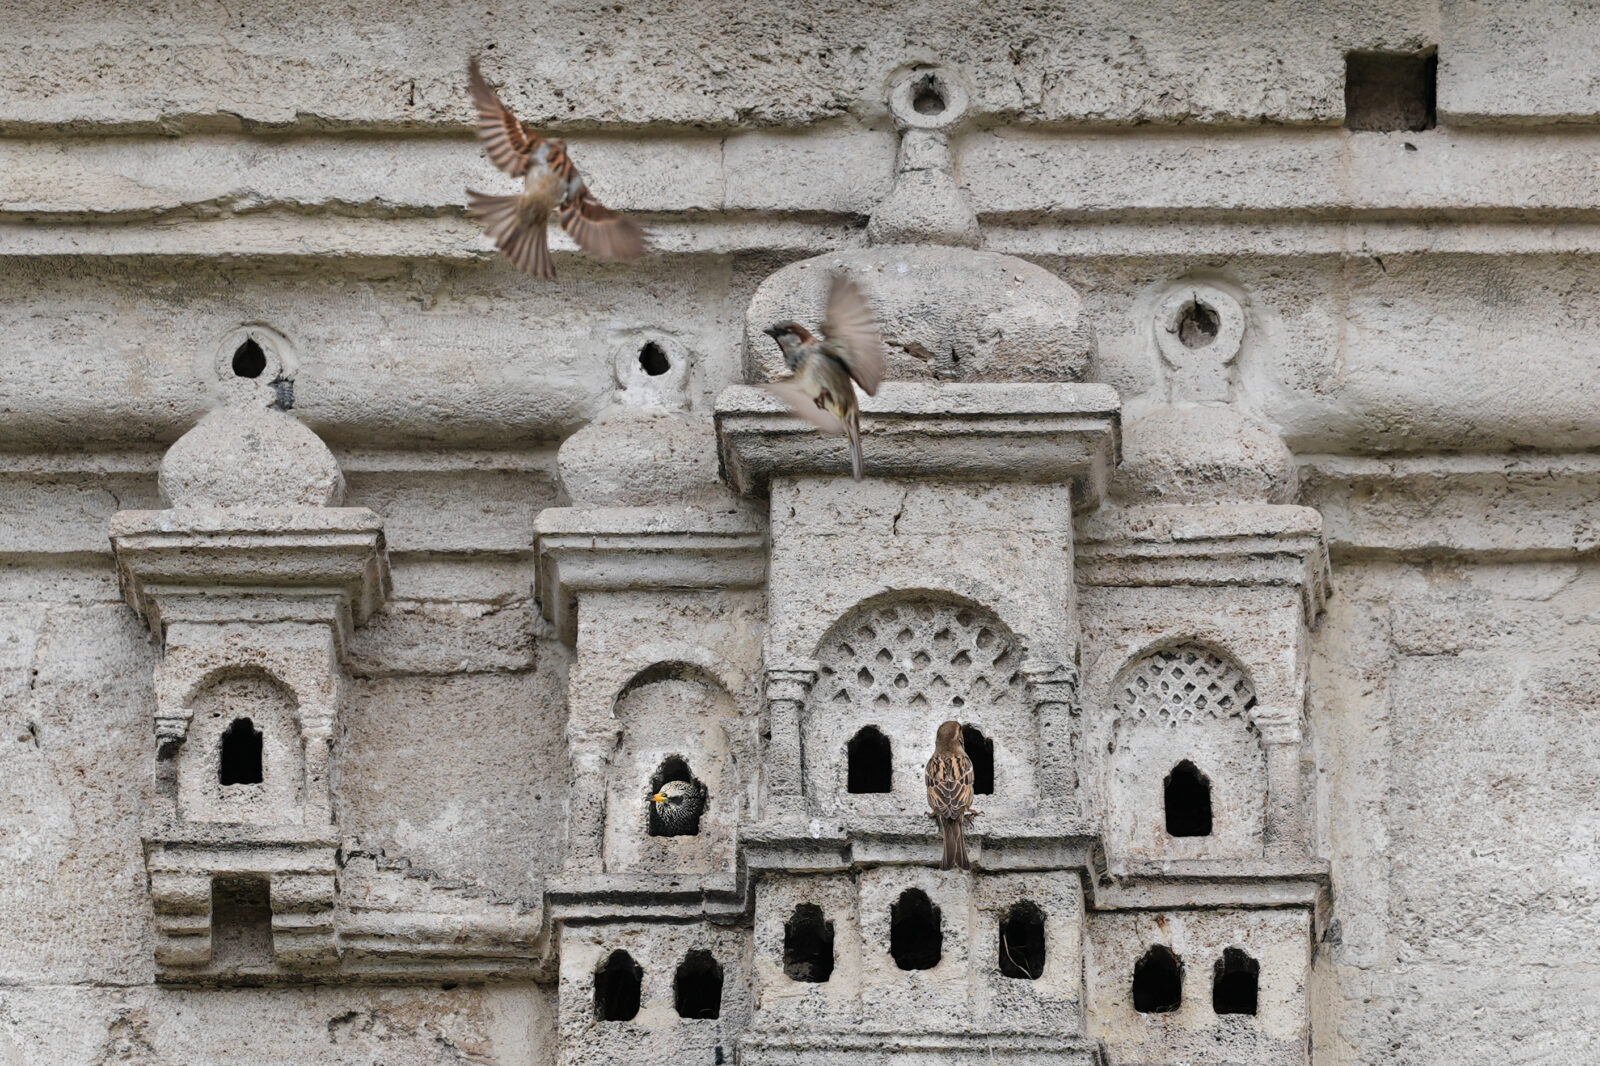 Ottoman bird palaces: Combining compassion for animals and elegant architecture